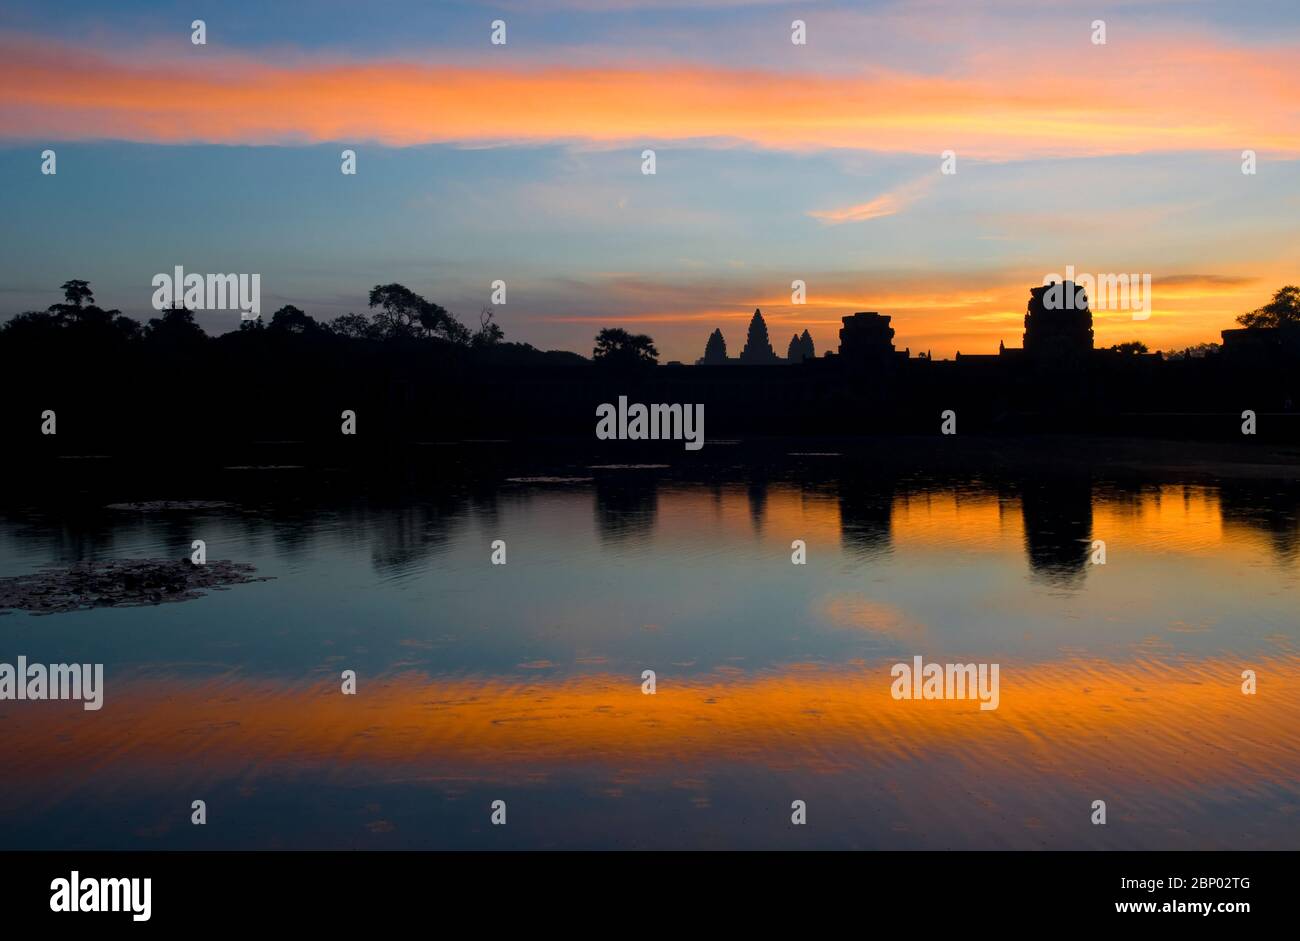 The silhouette of the Angkor Wat temple at sunrise with copy space, Siem Reap, Cambodia. Stock Photo